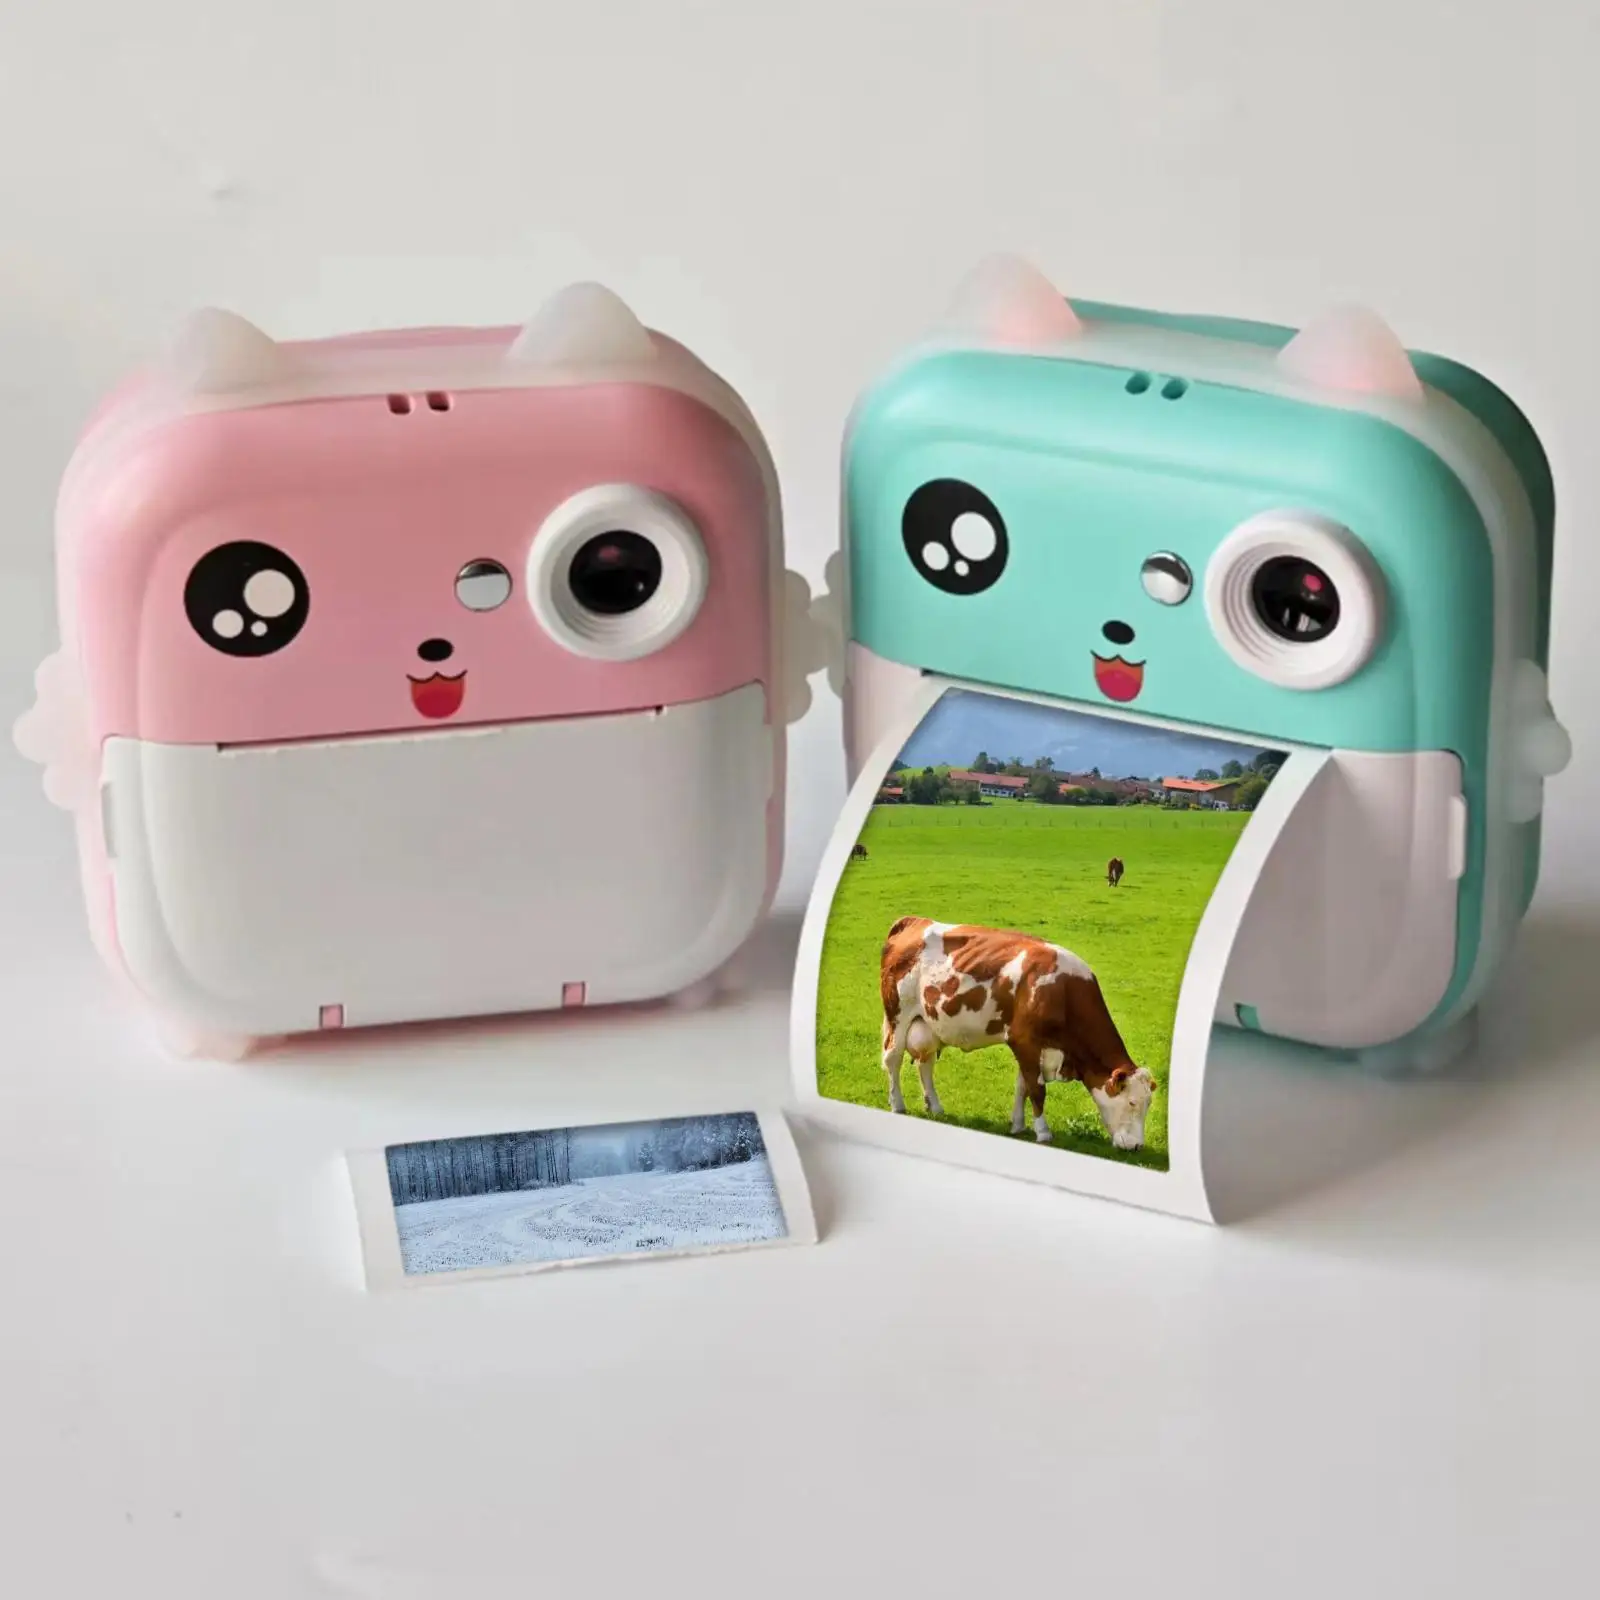 Instant Print Camera for Kids 2.4 inch Screen Toys Photo and Video Recording Kids Digital Camera for Girl Boys Age 4 5 6